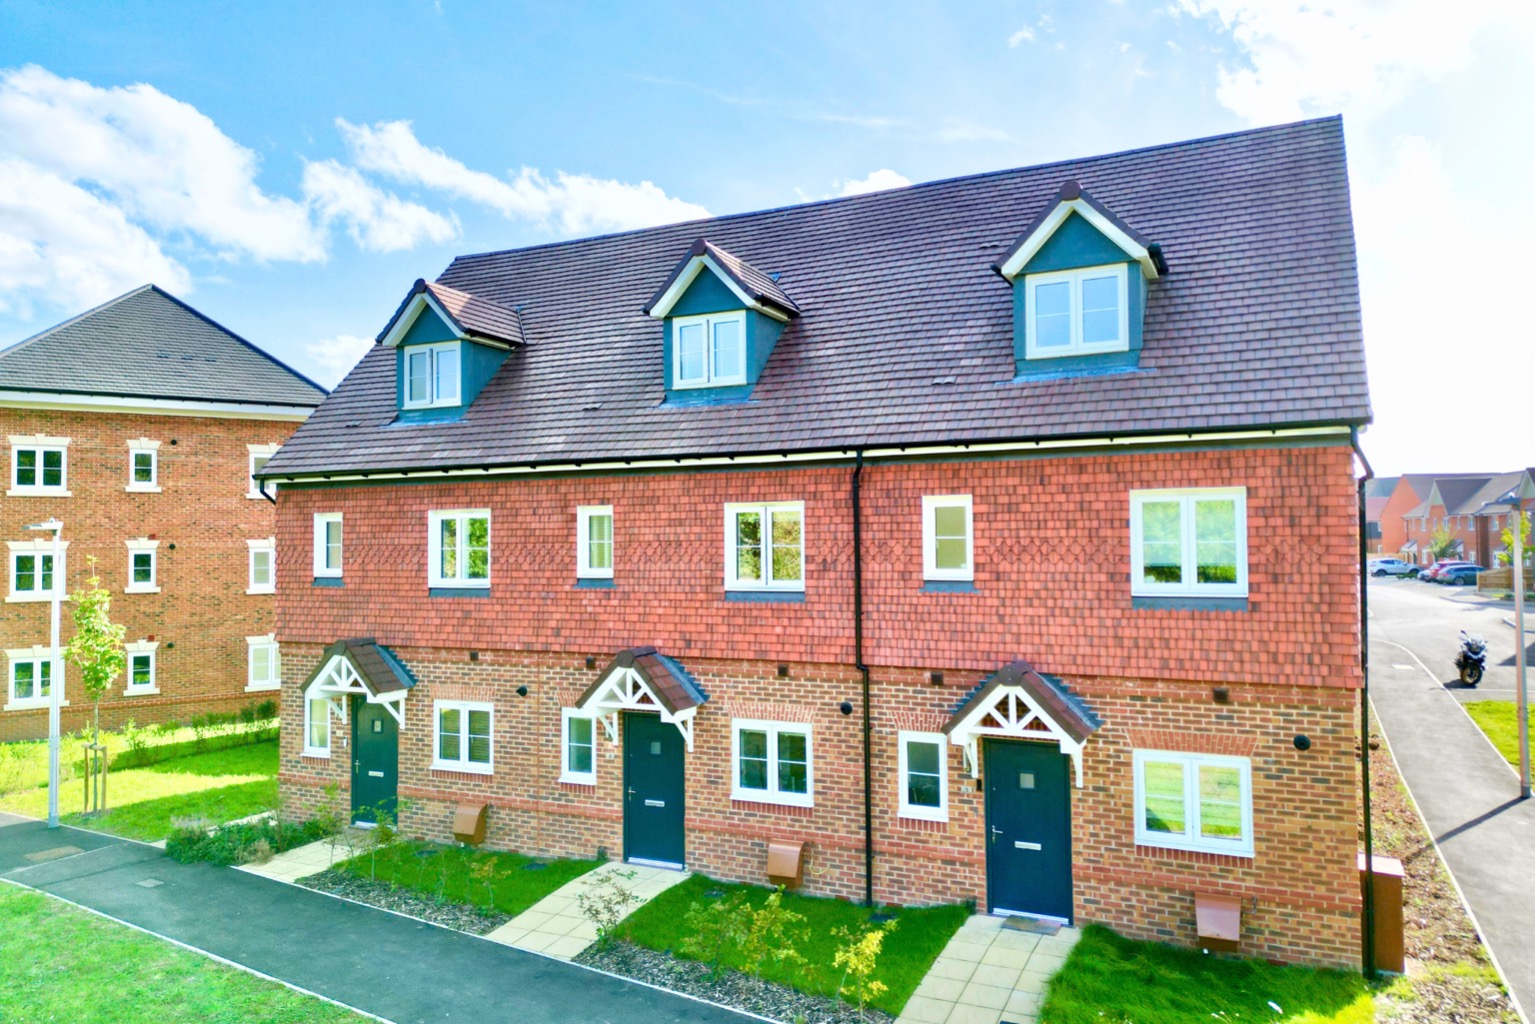 3 bed terraced house for sale in Harvest Path, Wokingham - Property Image 1